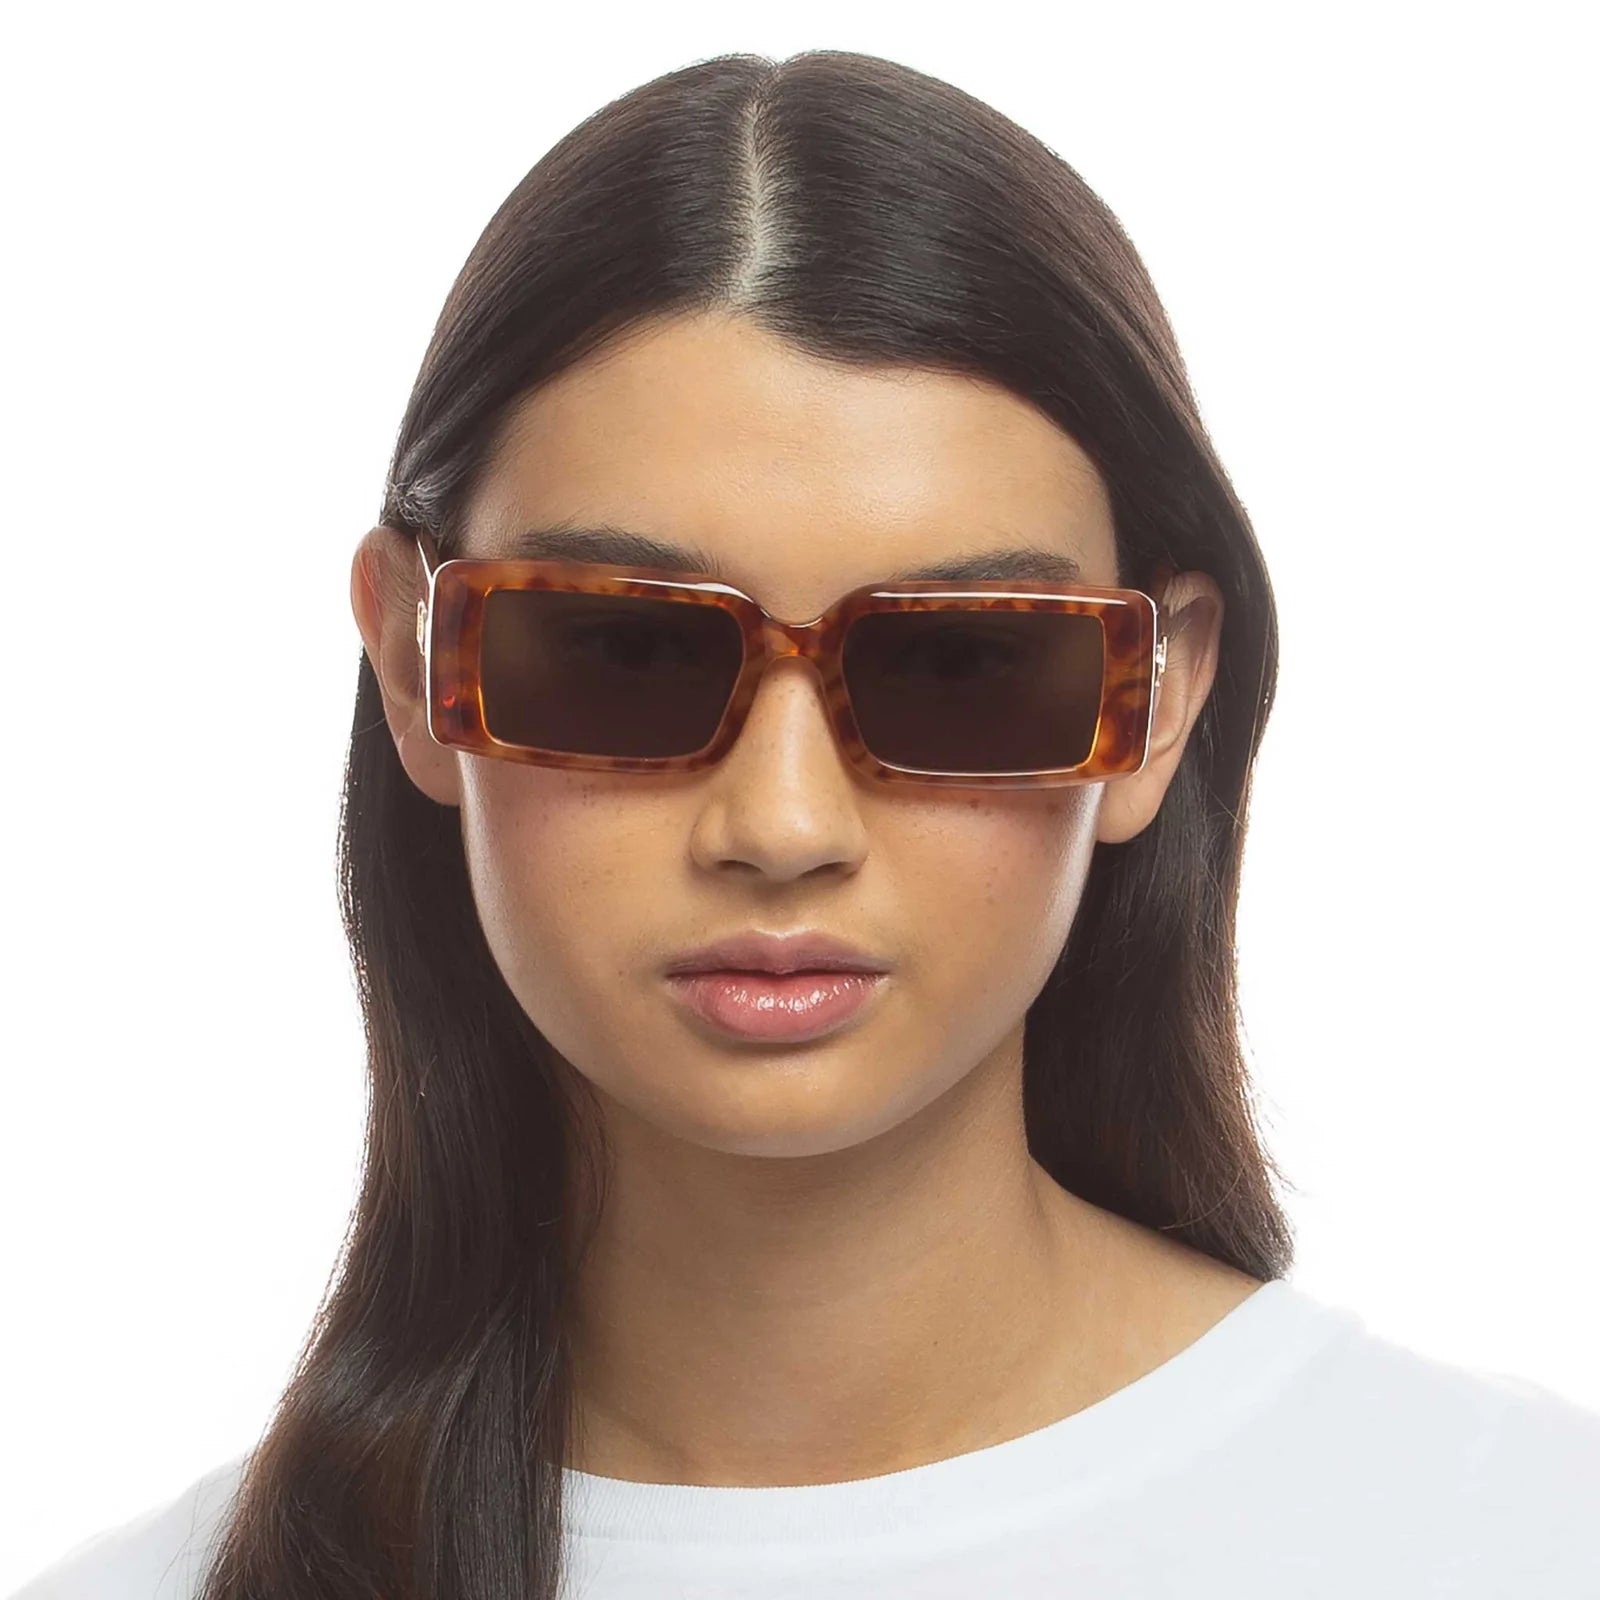 Le Specs Sunglasses The Impeccable - Toffee Tort